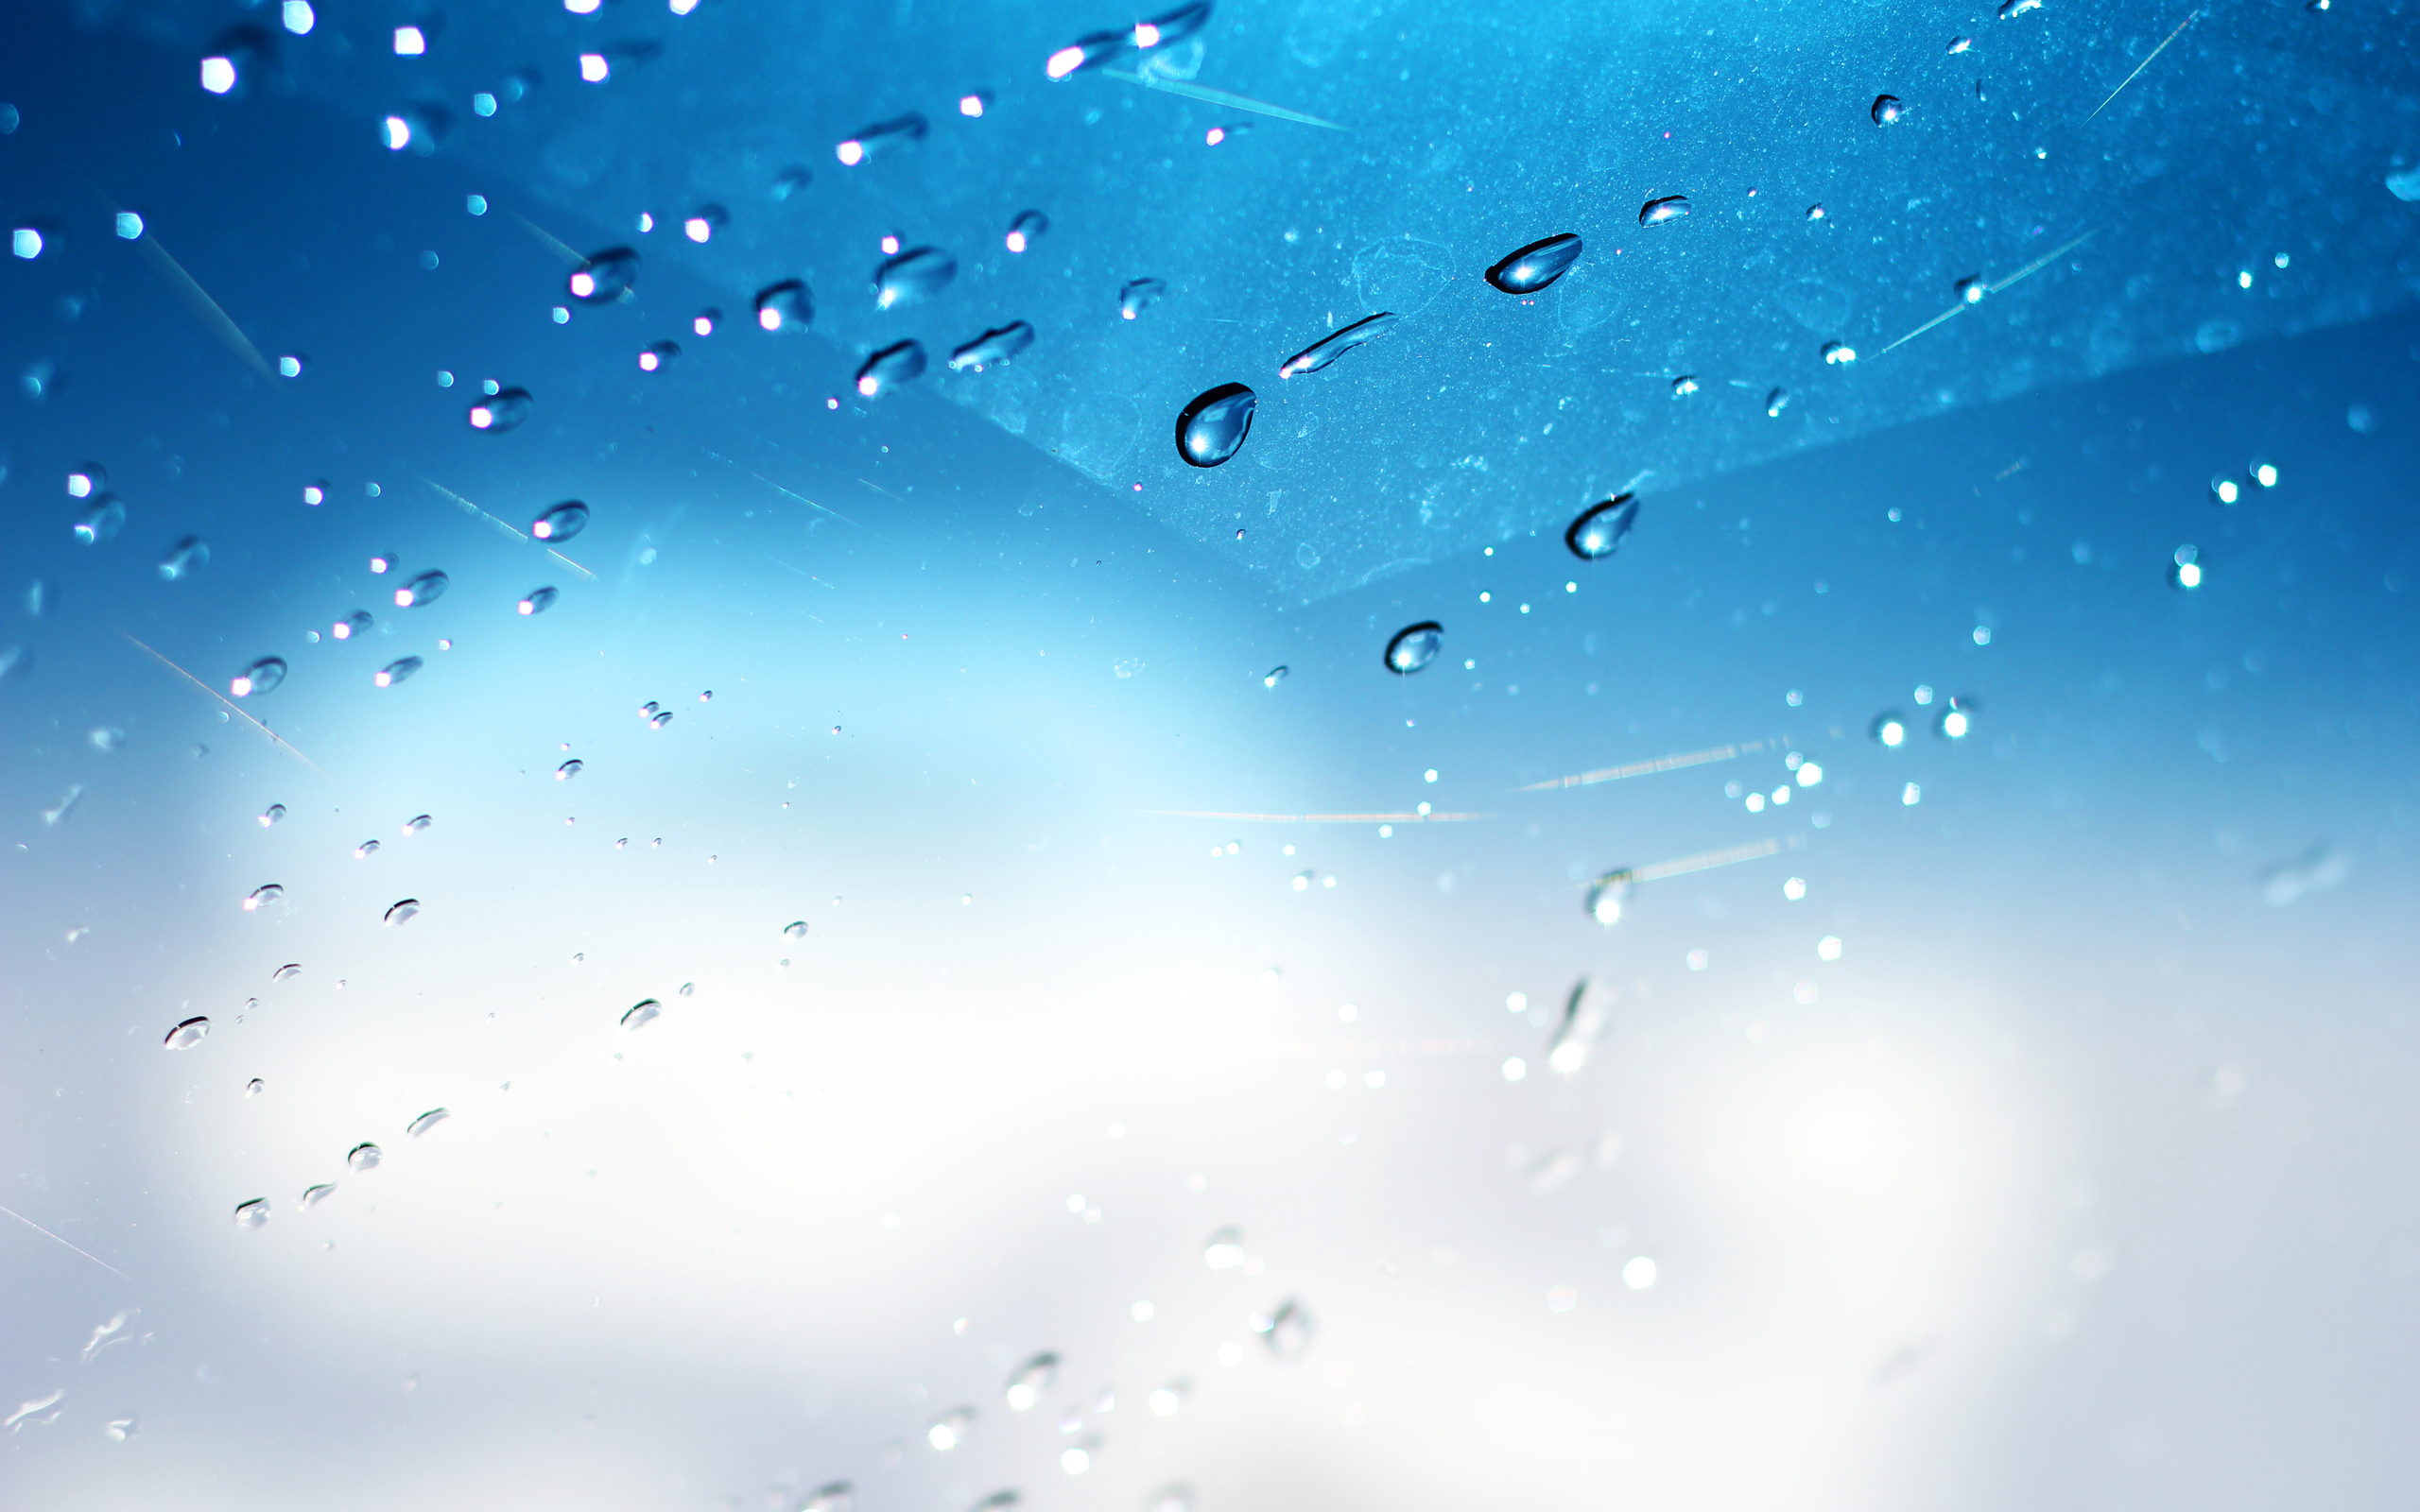 Water drops window Wallpaper for iPhone 11, Pro Max, X, 8, 7, 6 - Free  Download on 3Wallpapers